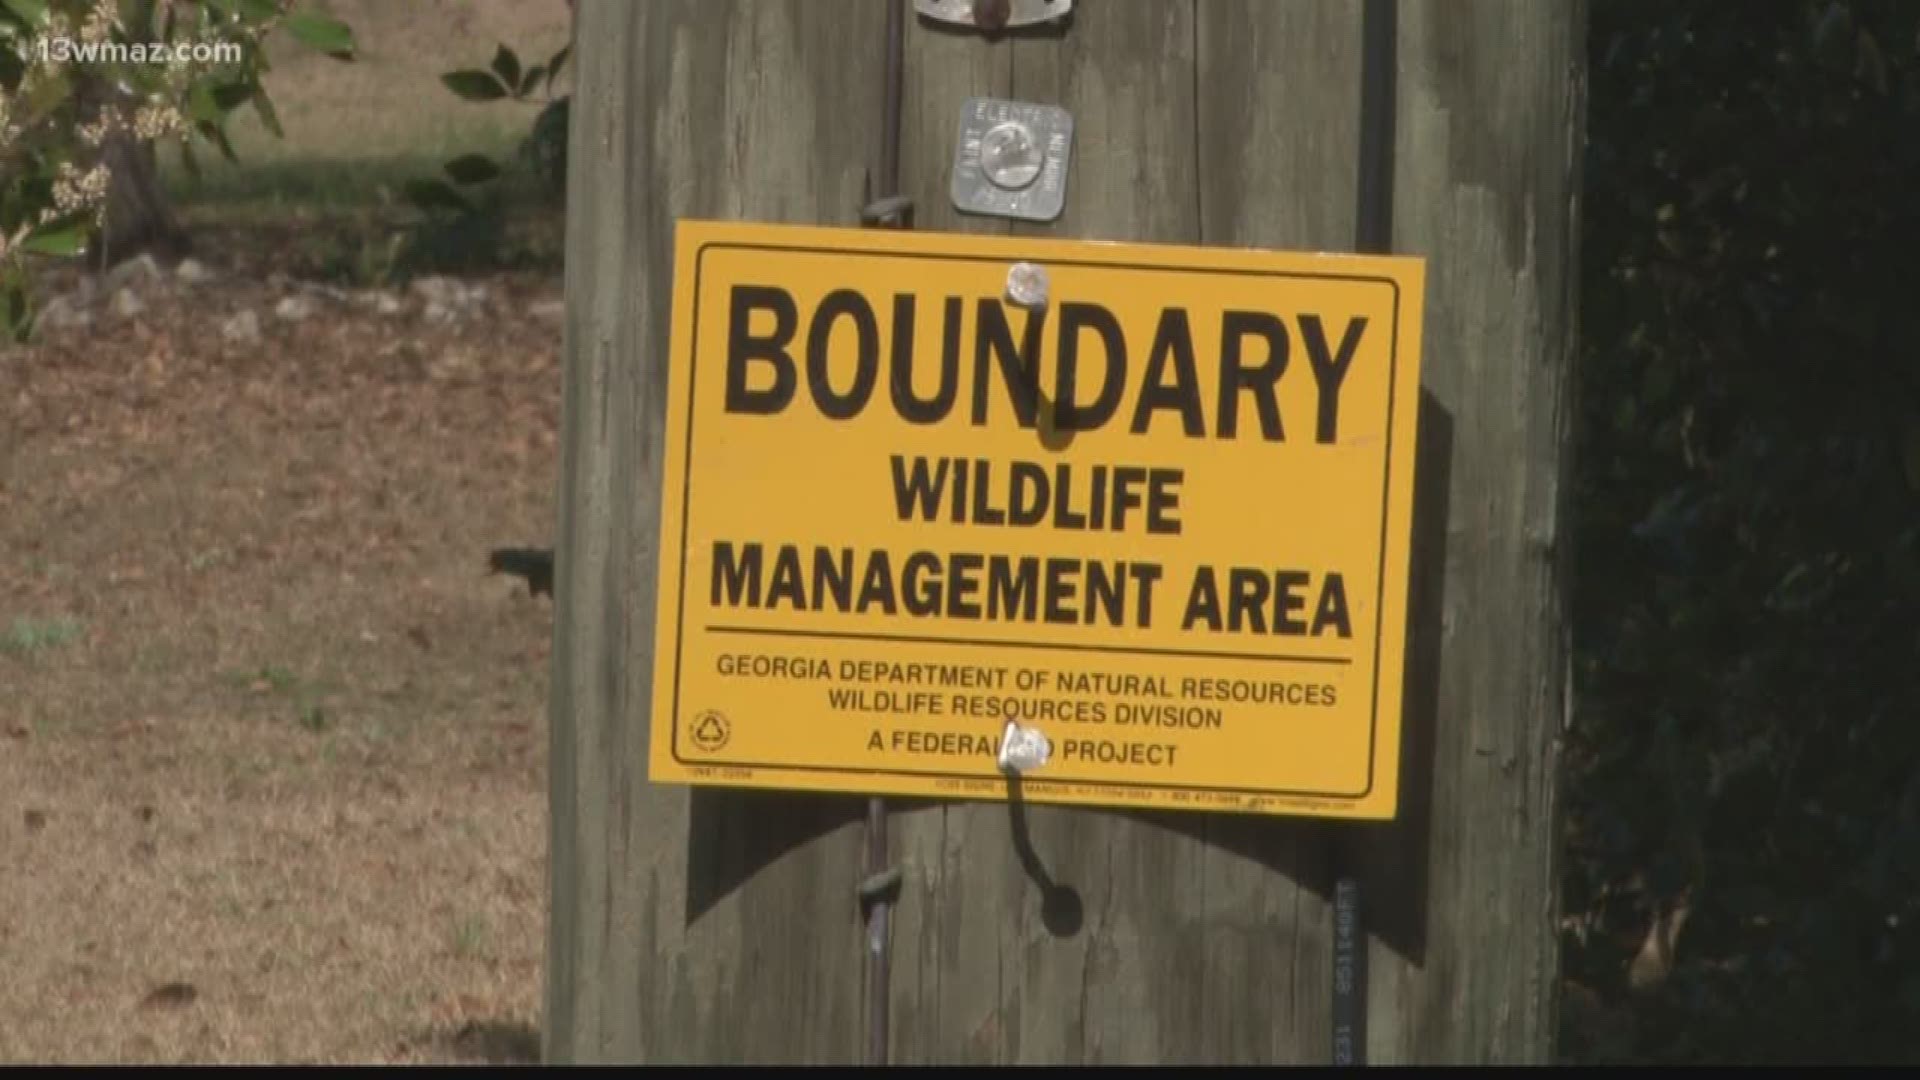 David O'Leary found out that Georgia's Department of Natural Resources opened land for big game hunting when he came home to find a man posting boundary limit signs right outside of his property.